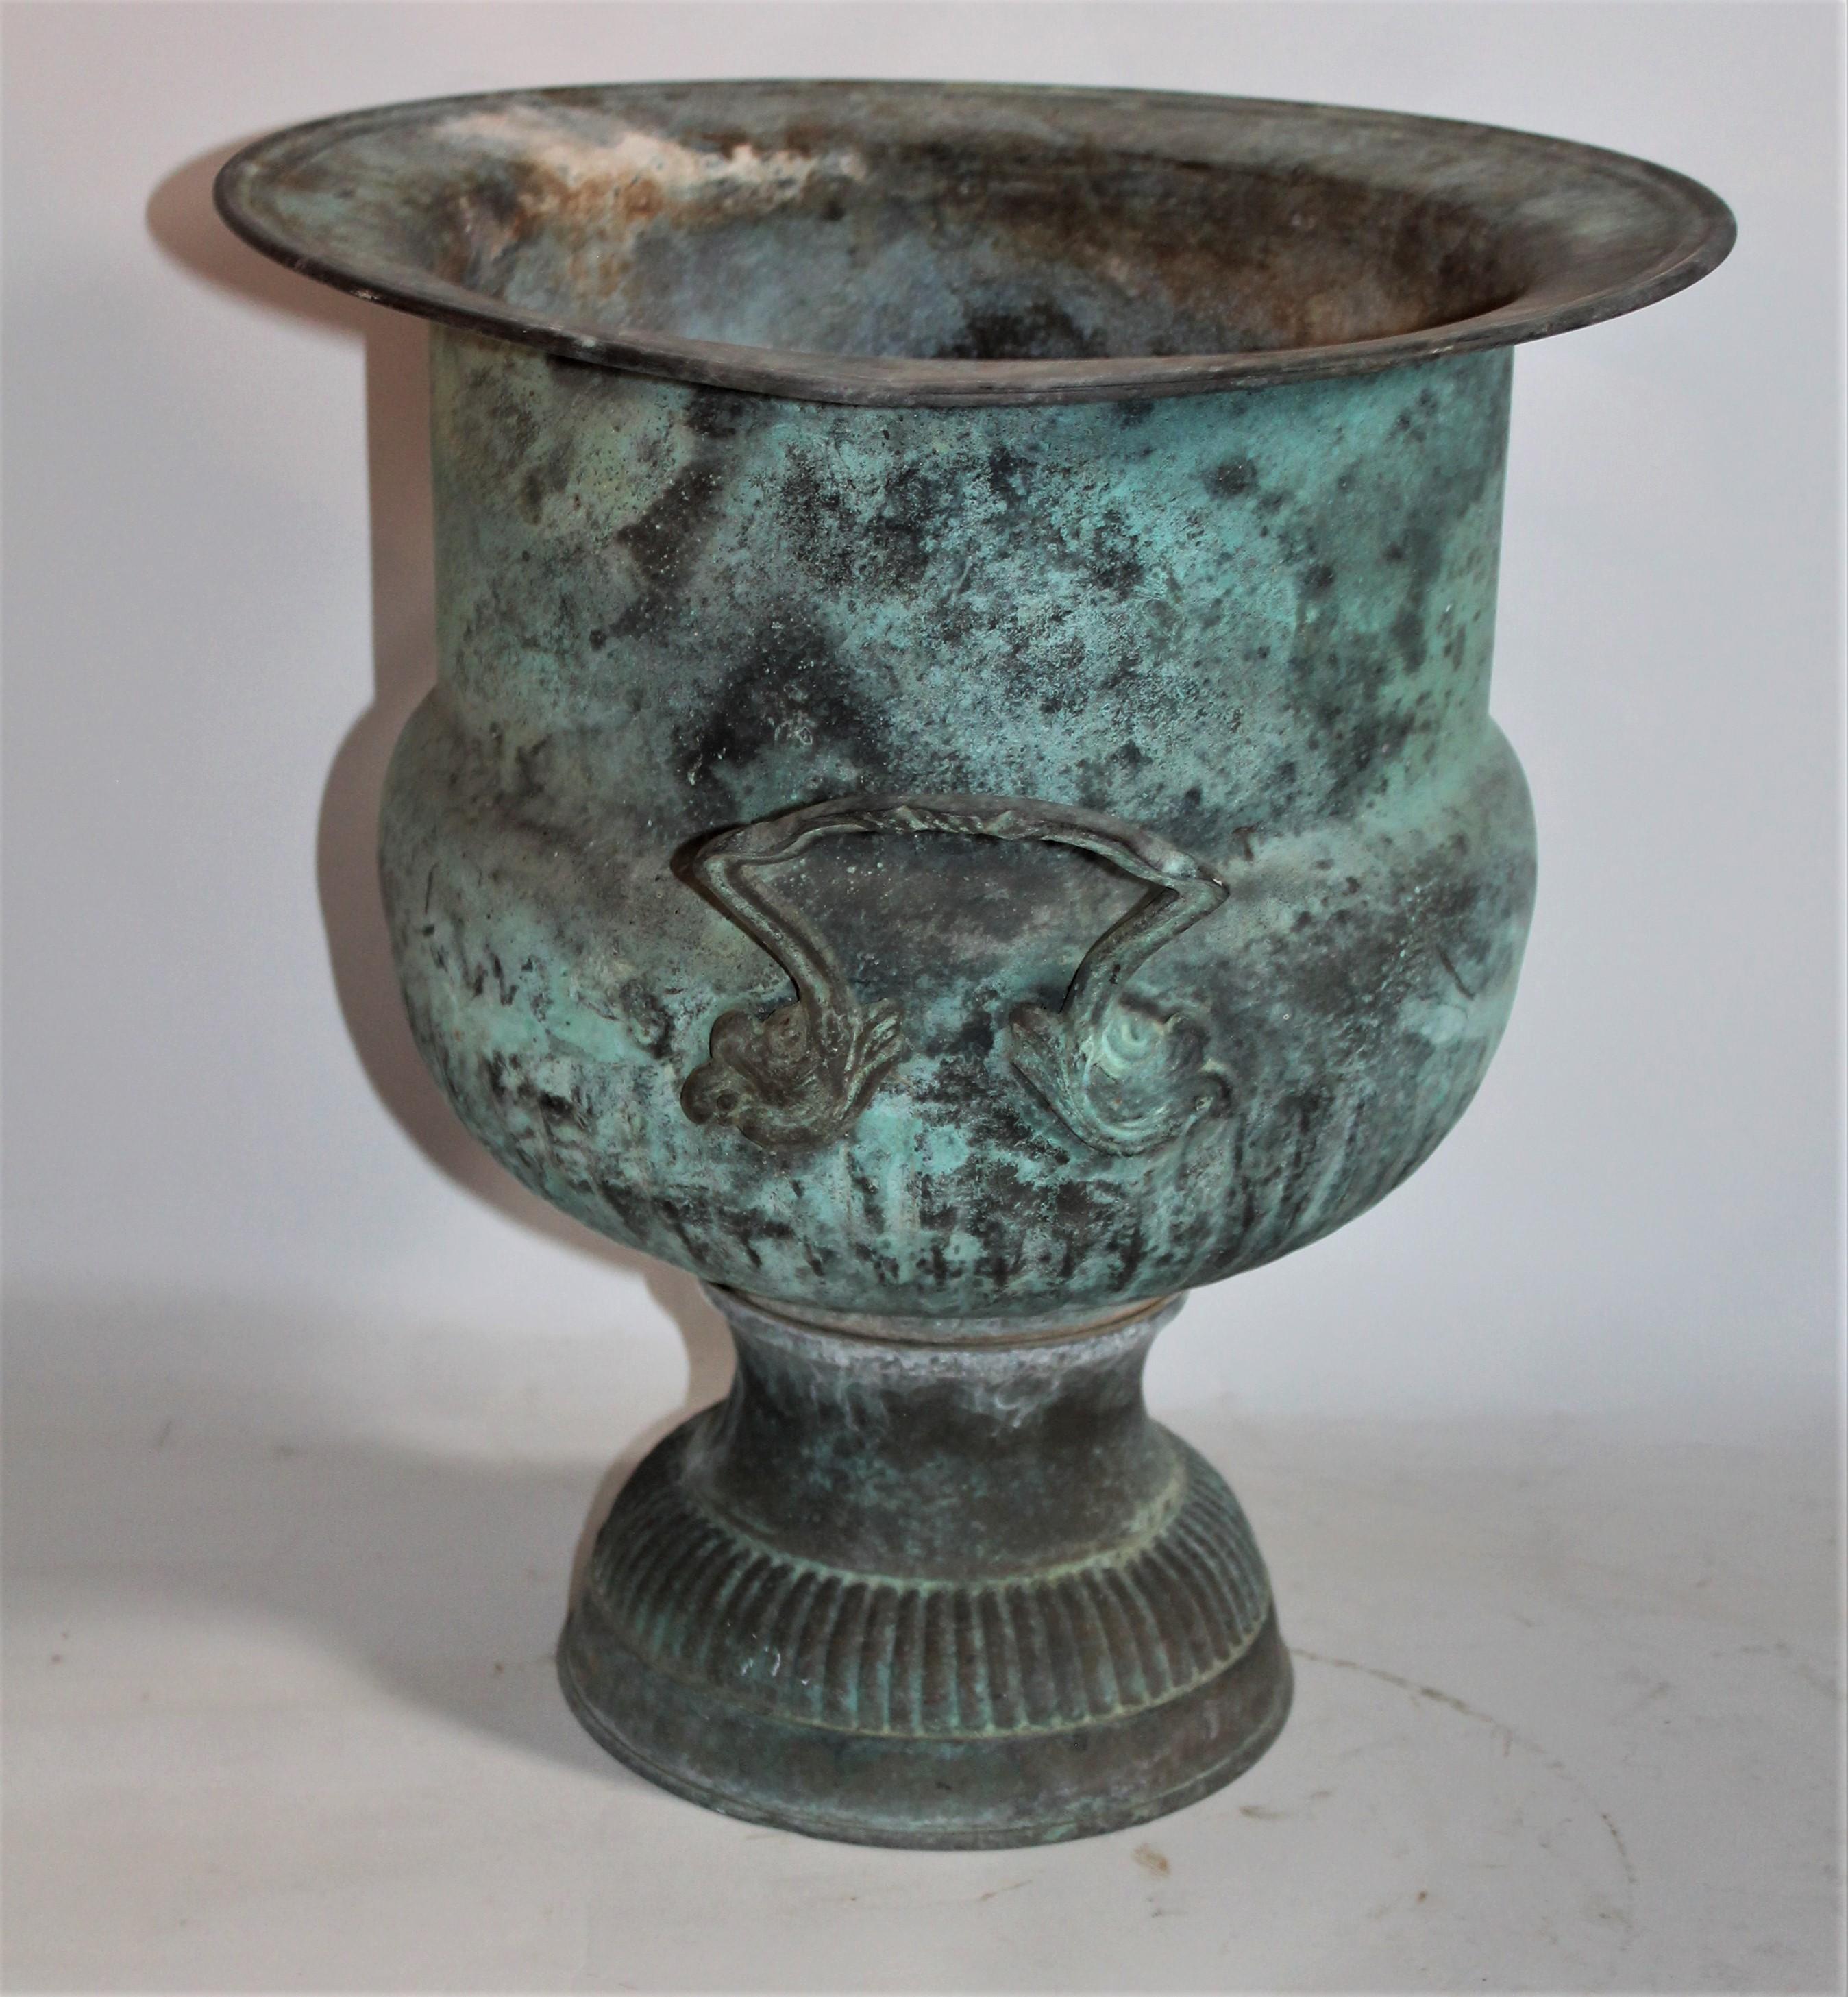 American Classical 19th Century Urn with Handles in Patinated Copper Surface